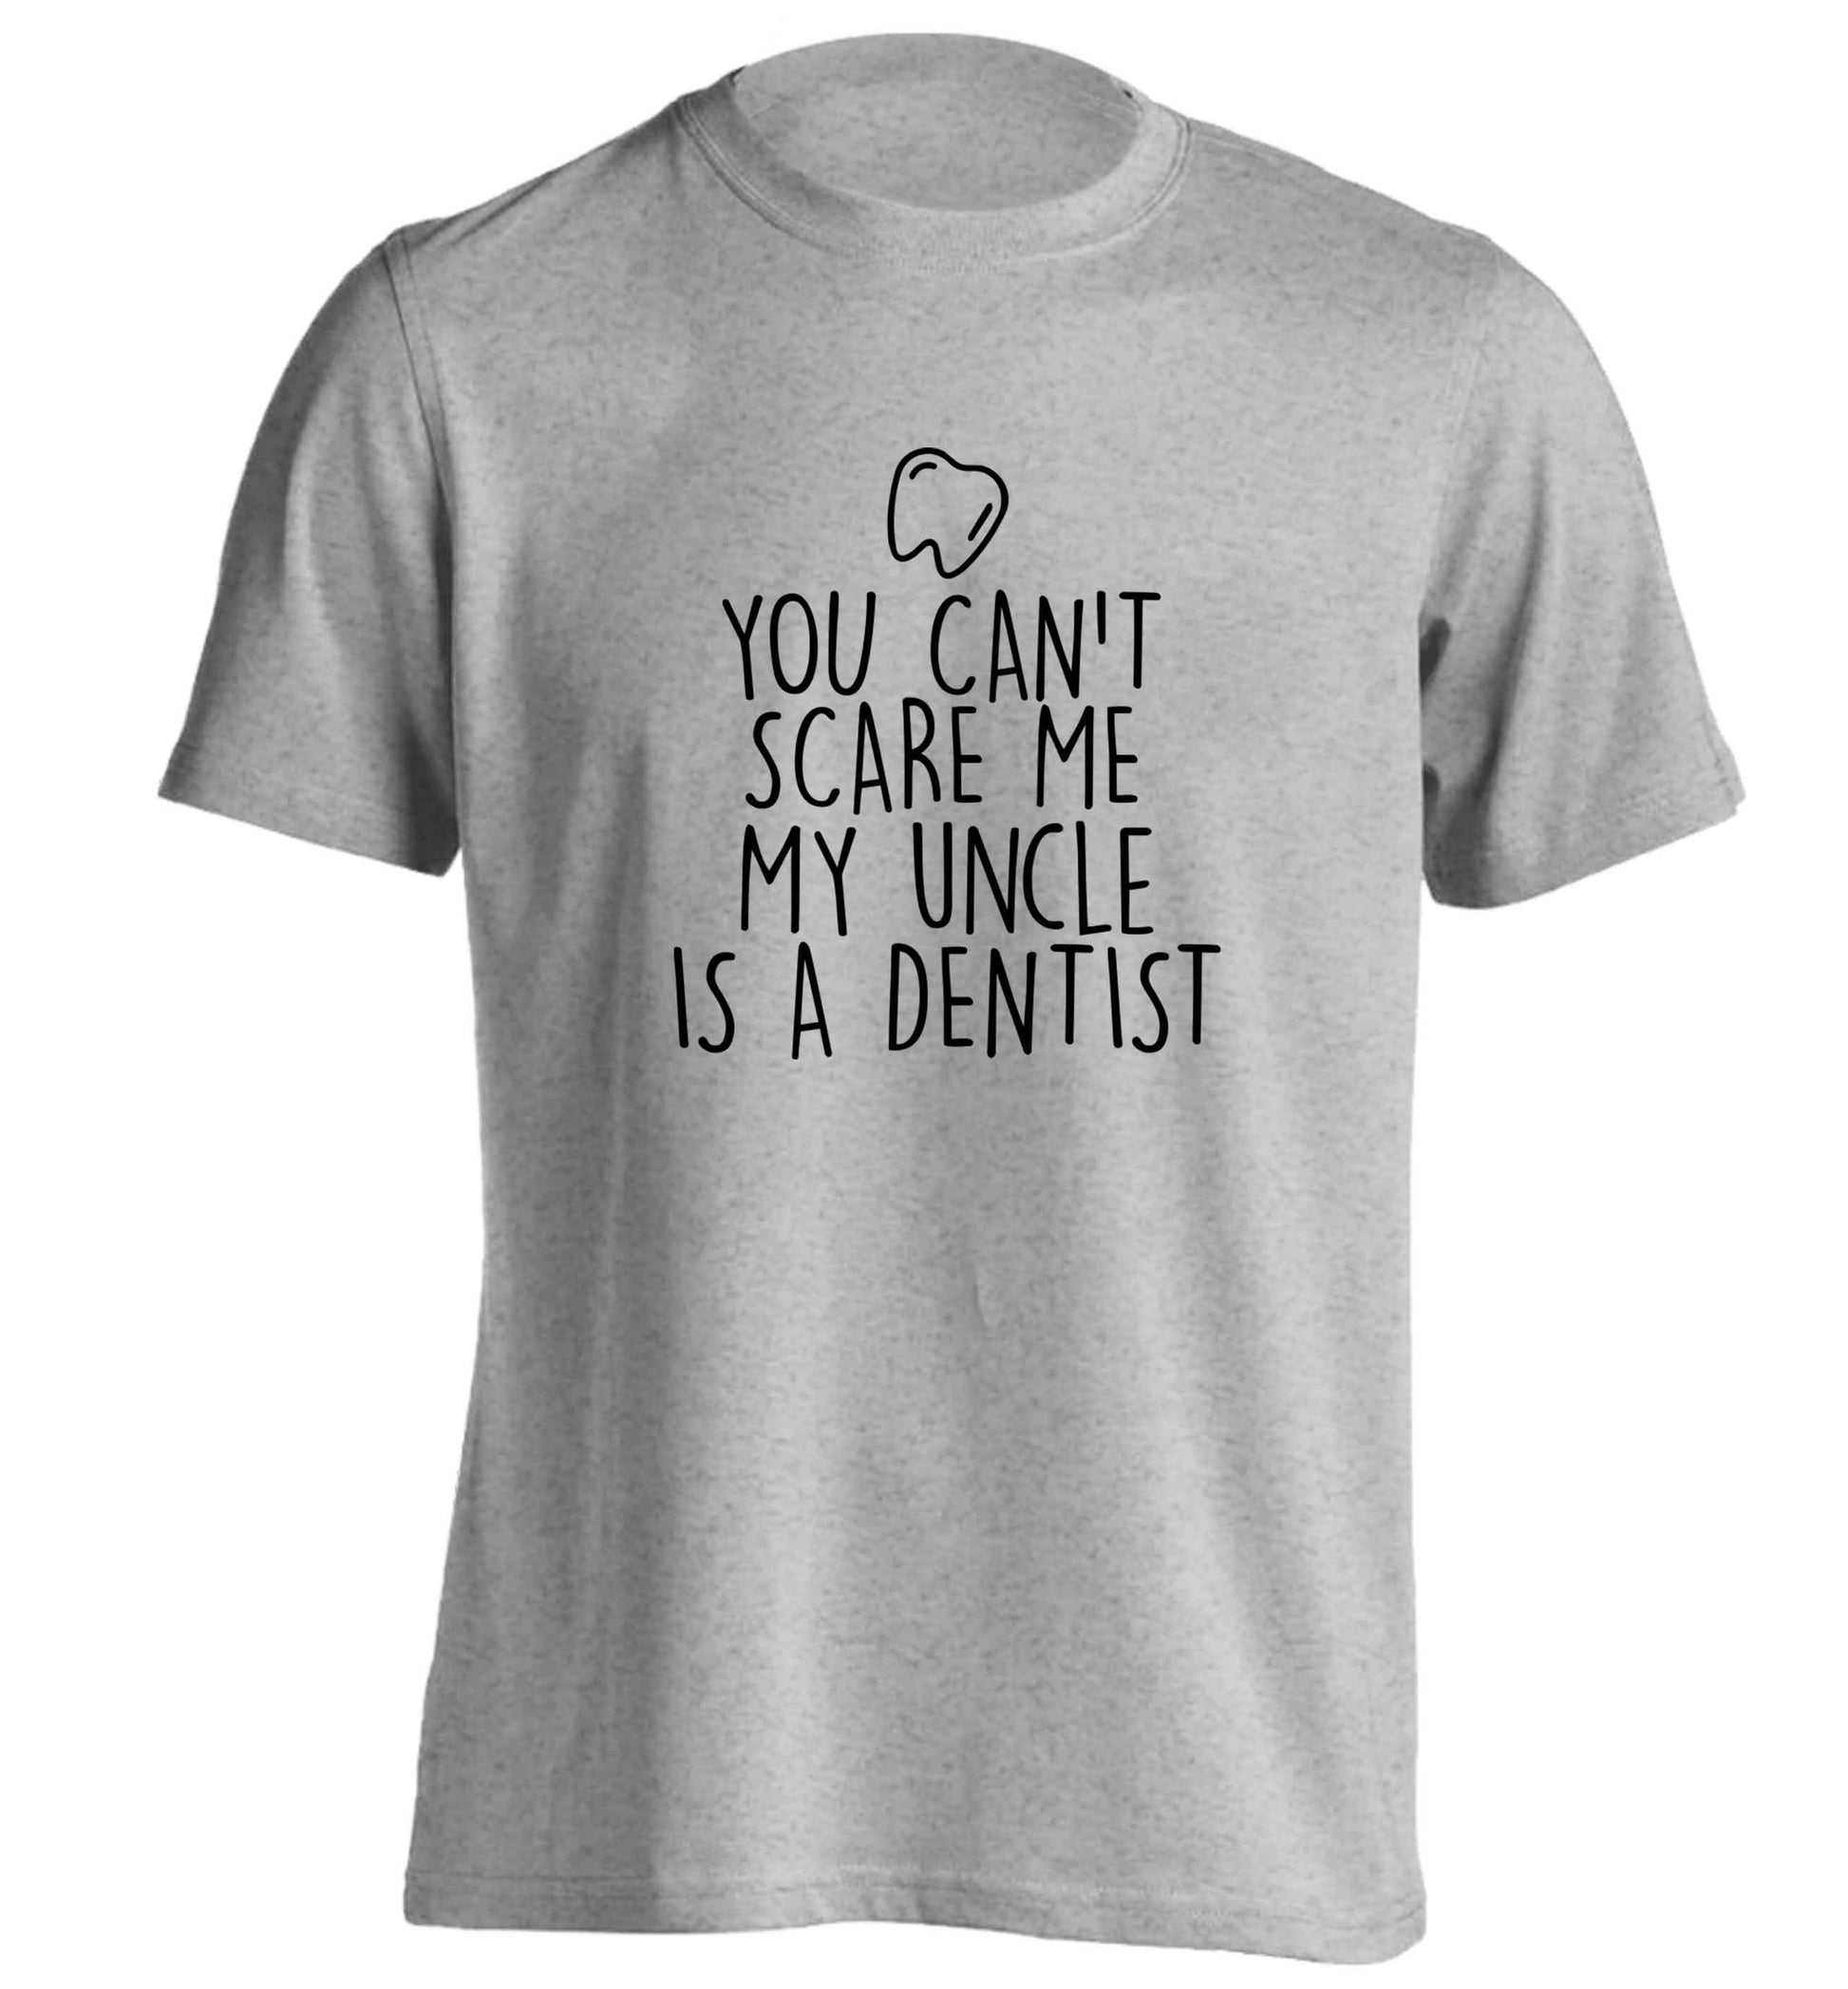 You can't scare me my uncle is a dentist adults unisex grey Tshirt 2XL